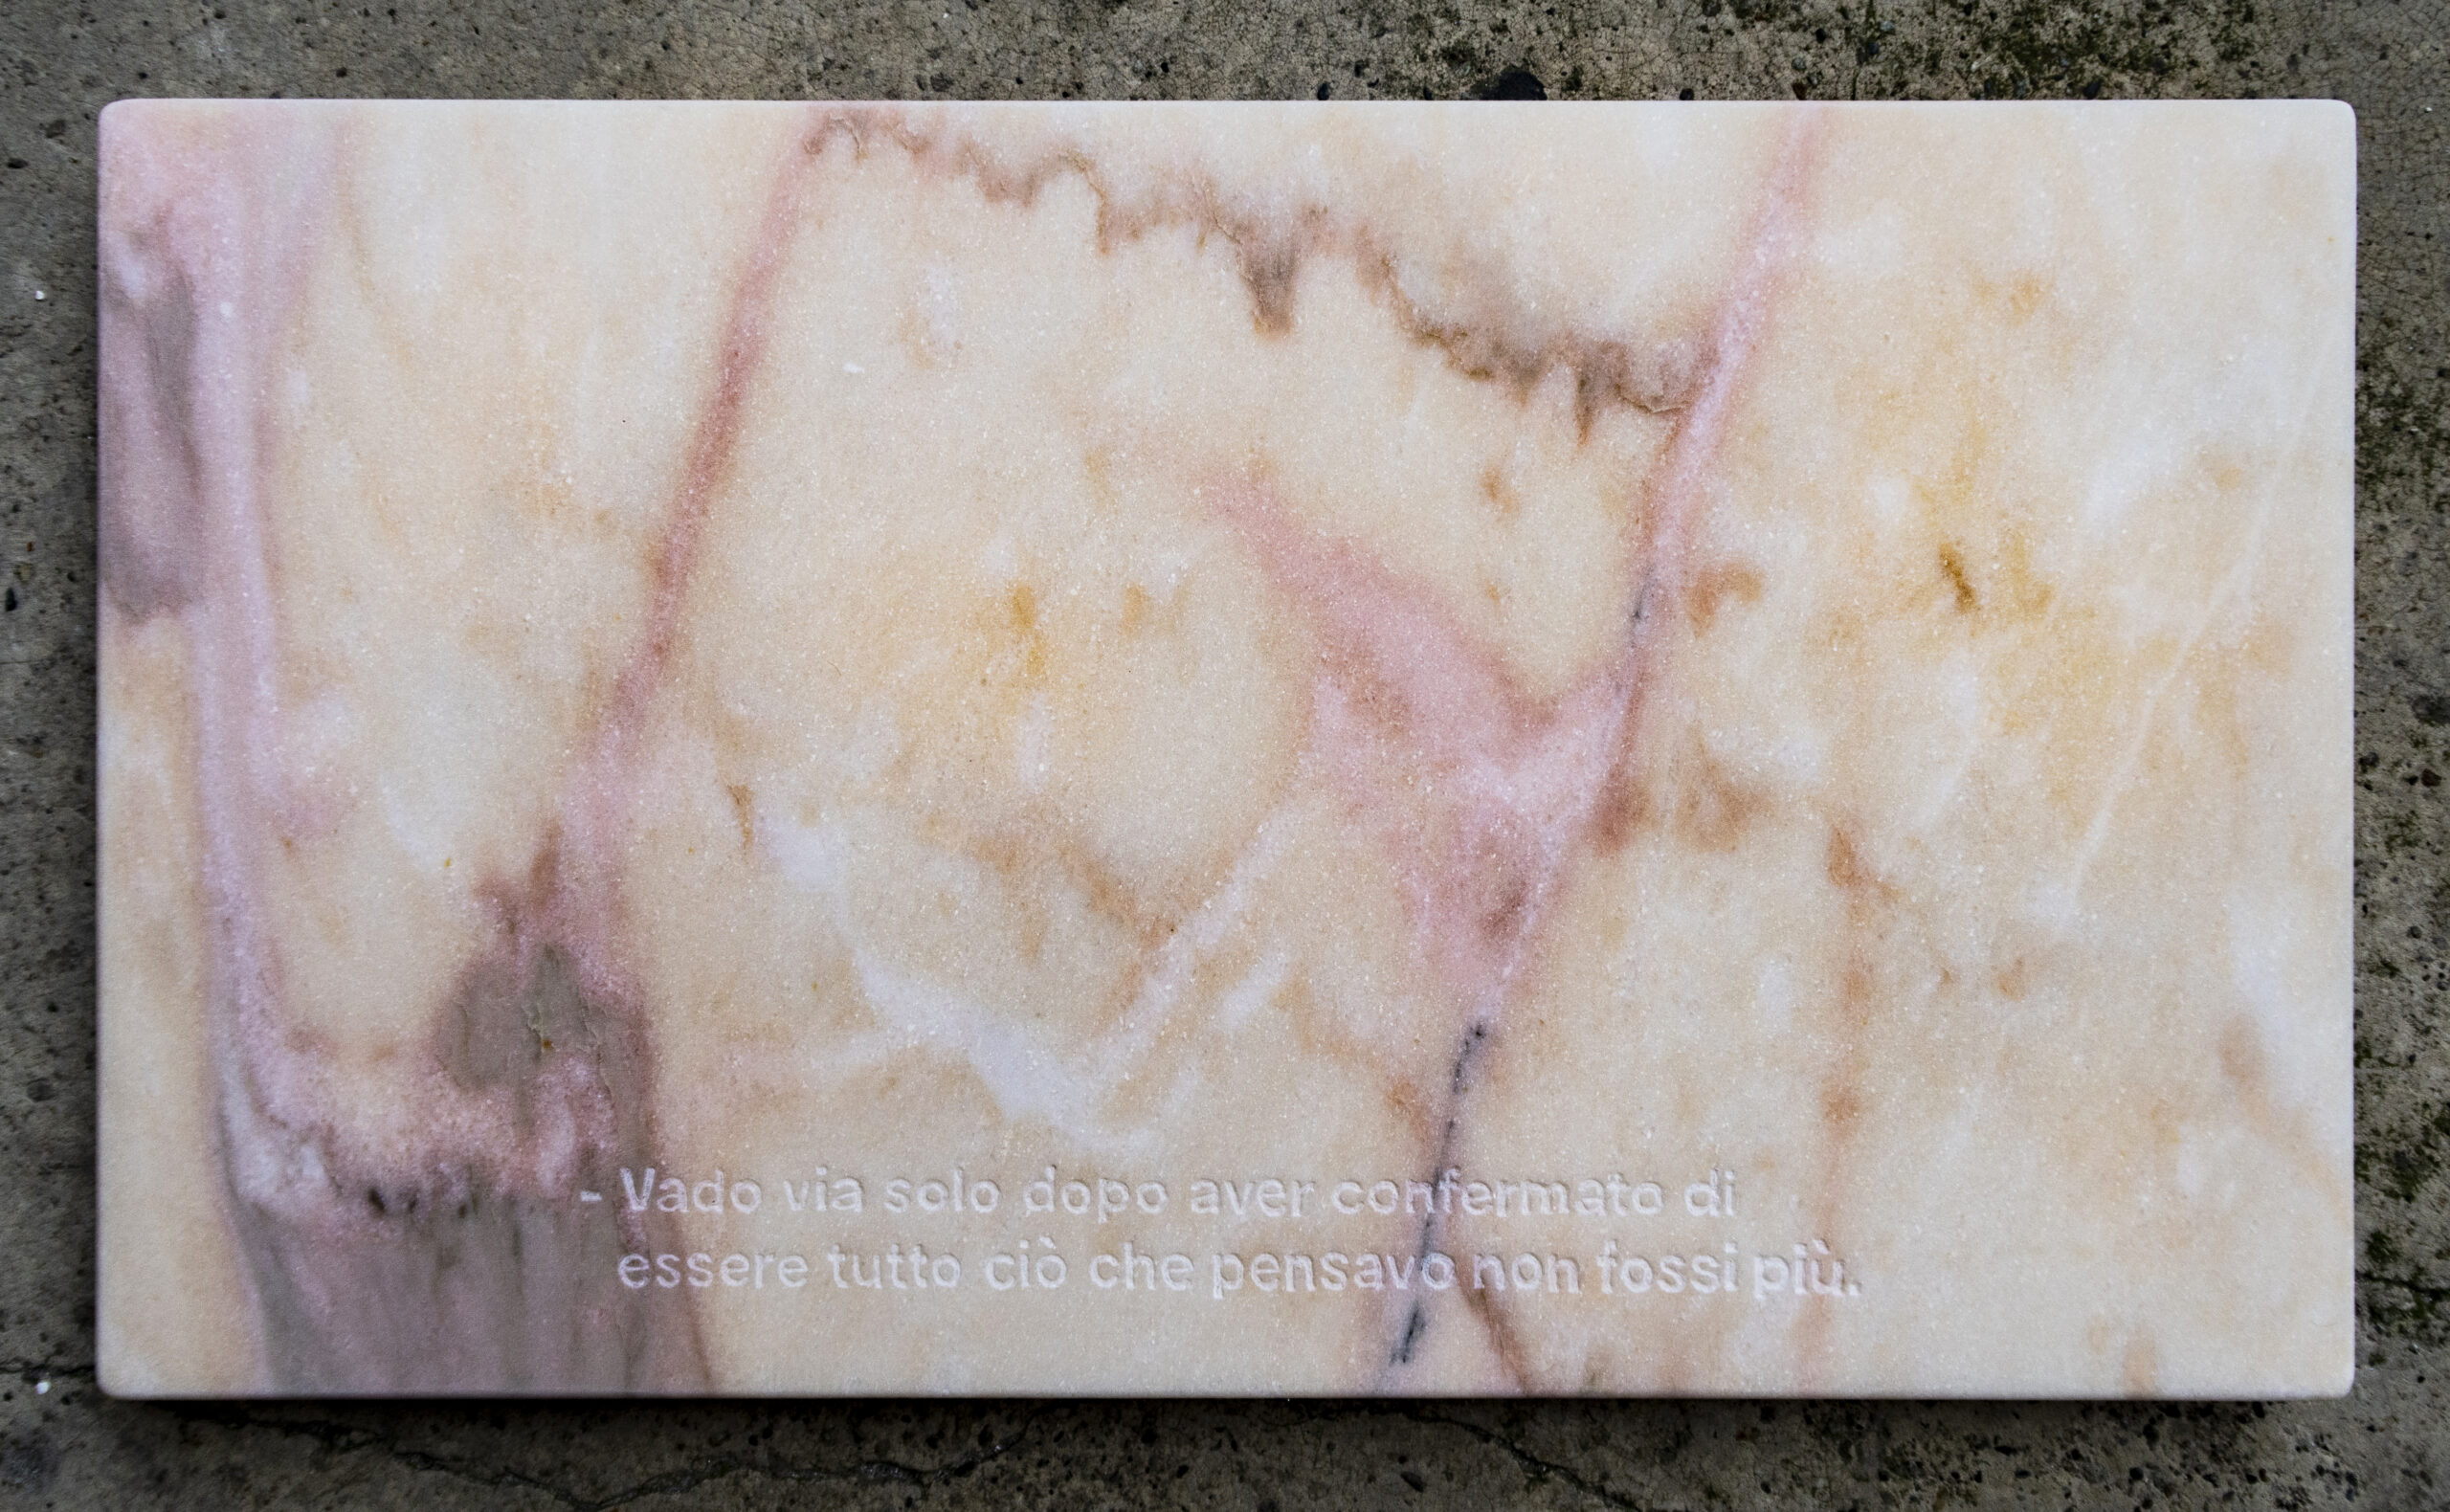 Orange marble, 2020, 50 x 29 cm - Marco Curiale - courtesy of the artis